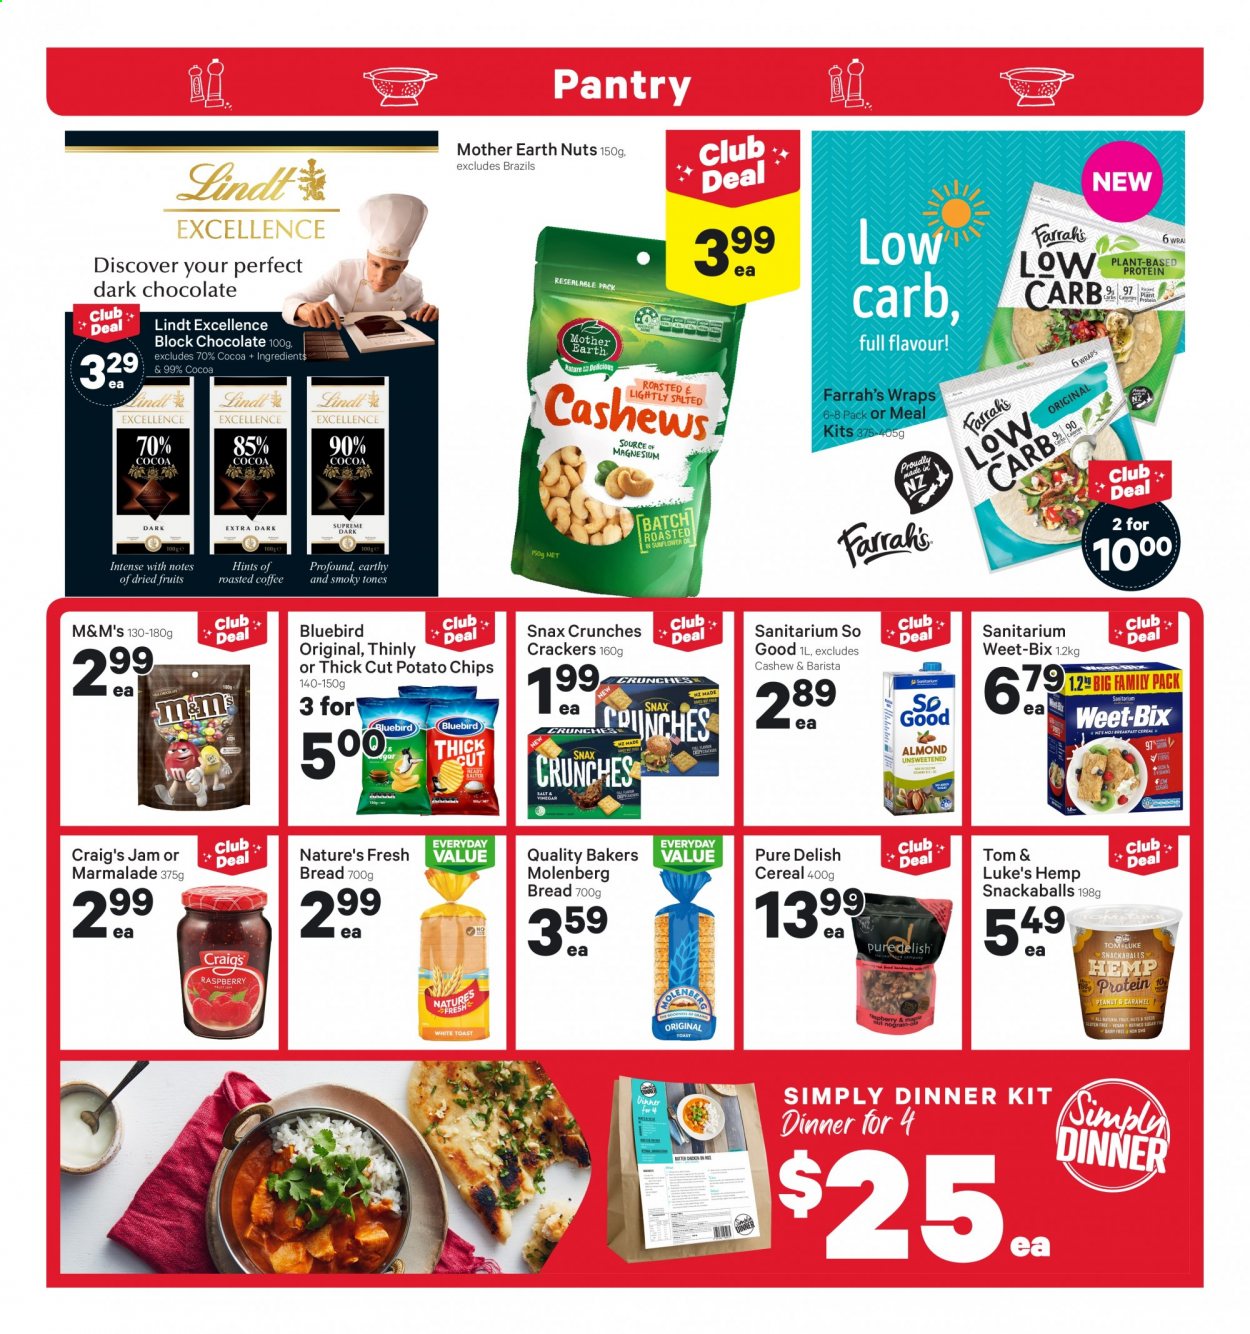 thumbnail - New World mailer - 05.07.2021 - 11.07.2021 - Sales products - wraps, dinner kit, butter, chocolate, Lindt, M&M's, crackers, dark chocolate, Mother Earth, potato chips, chips, Bluebird, cereals, Weet-Bix, caramel, fruit jam, cashews, brazil nuts, magnesium. Page 12.